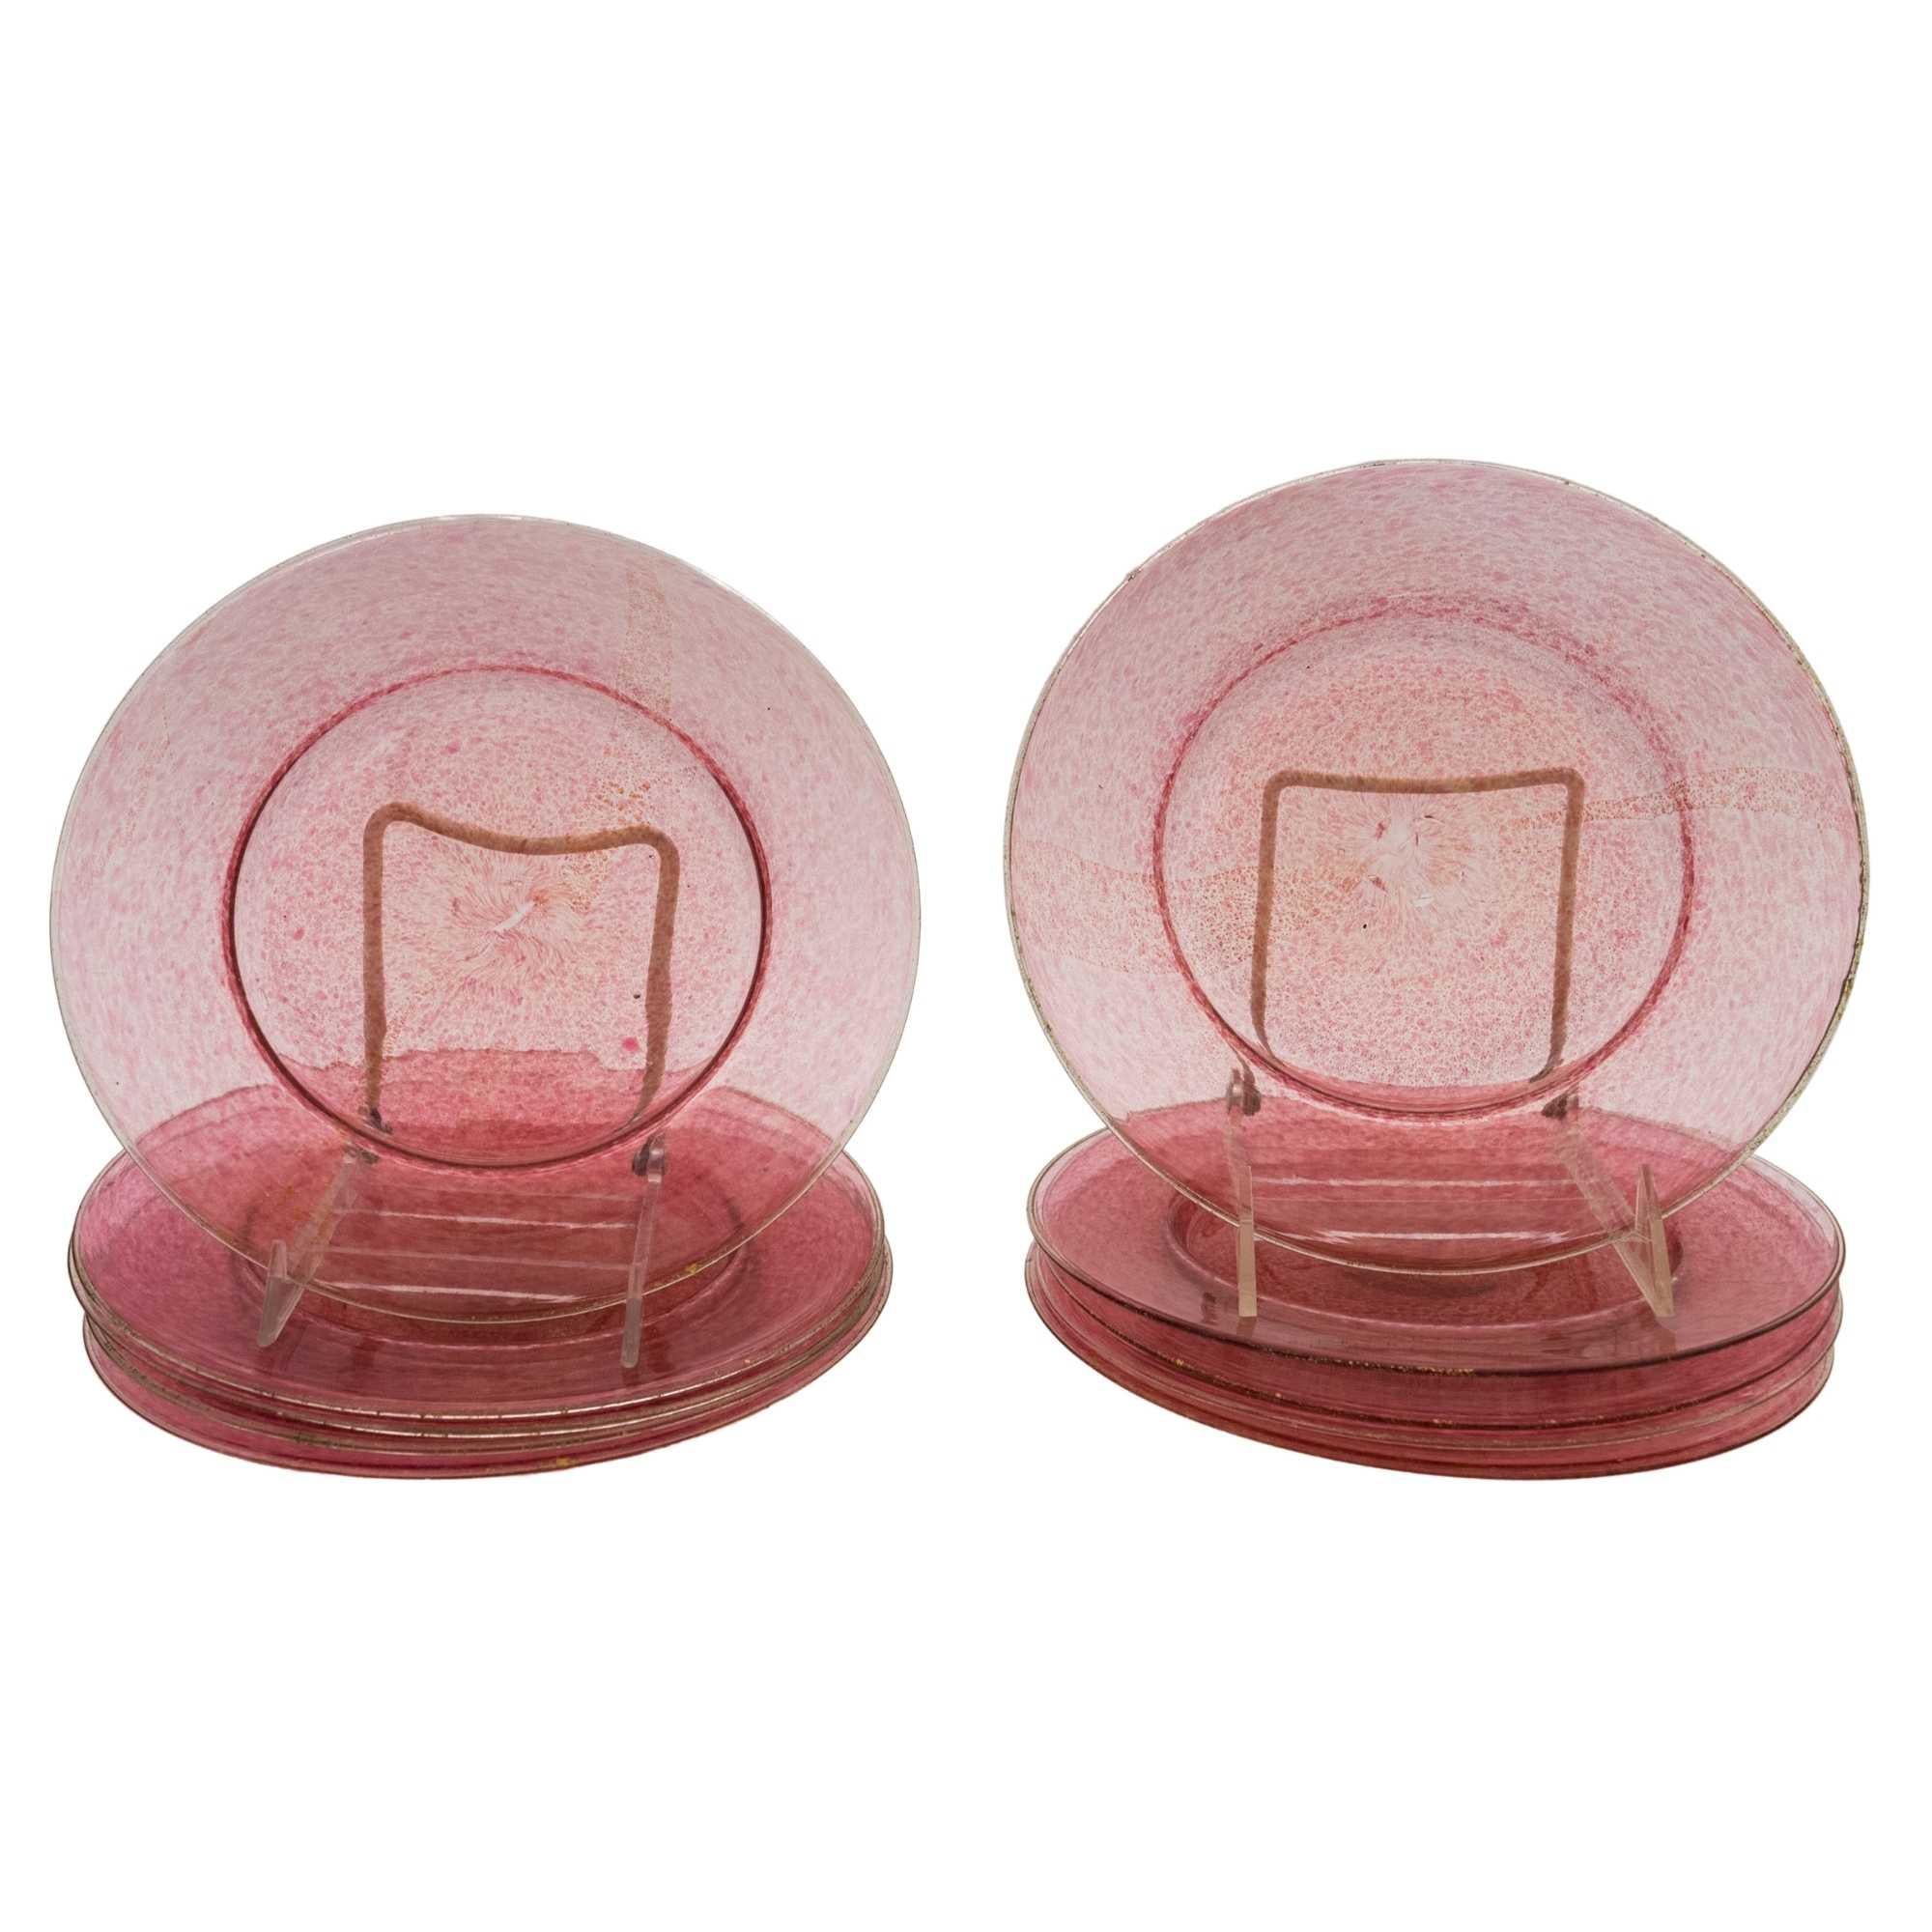 A classic and elegant set of pink dessert or salad plates from the Isle of Murano. A perfect size and nice swirls of 24 karat gold blown into the pink glass. In very nice antique condition.